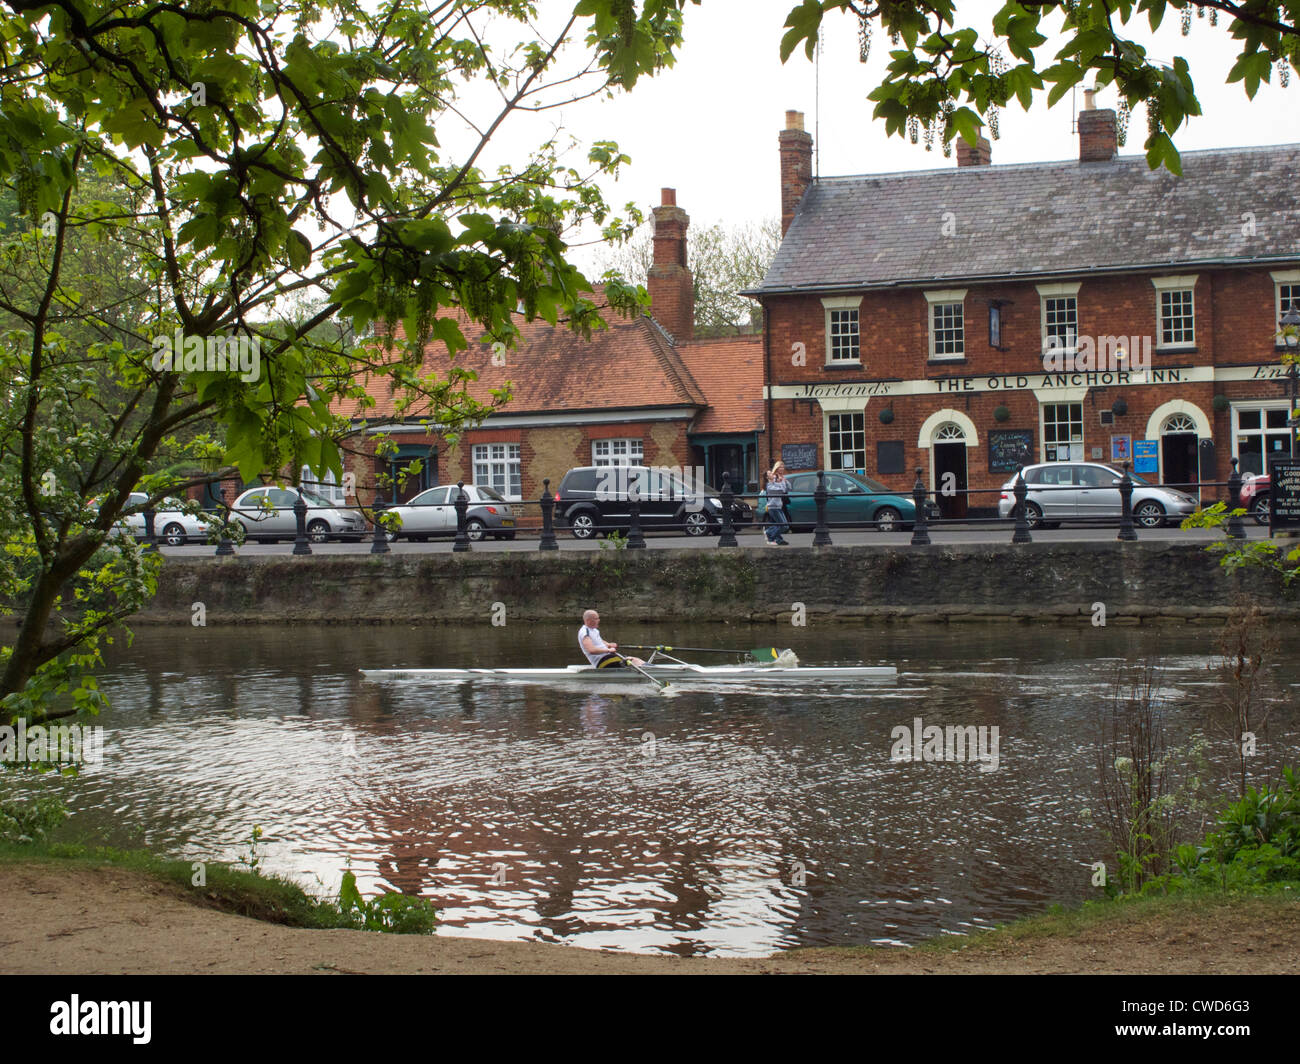 Single male sculler on the Thames at Abingdon along side The Old Anchor public house (pub), Oxfordshire Stock Photo